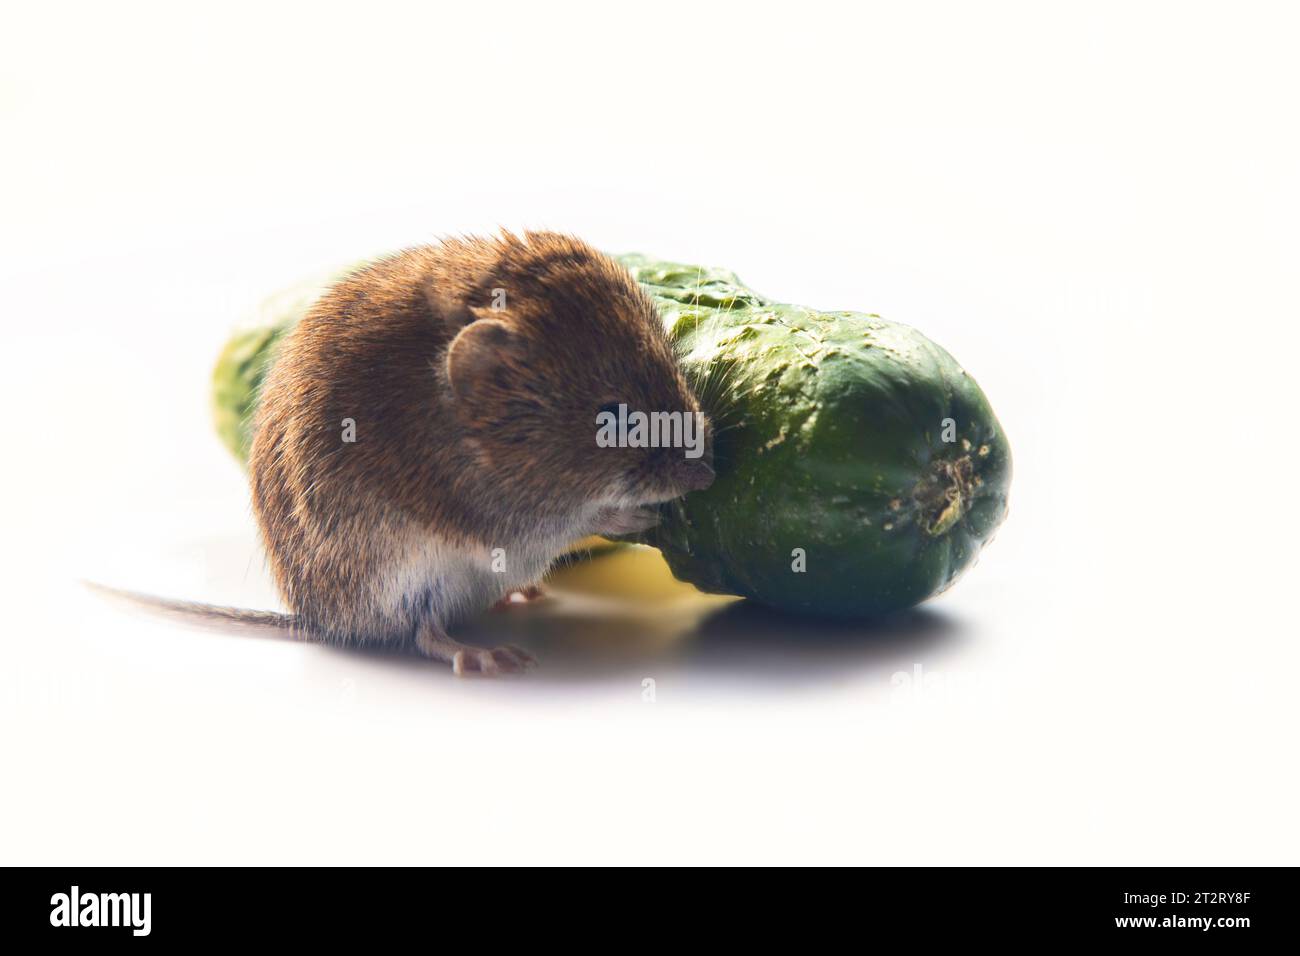 Mice severely damage vegetables in vegetable storages. Red-backed Vole is eating cucumber on a white background Stock Photo